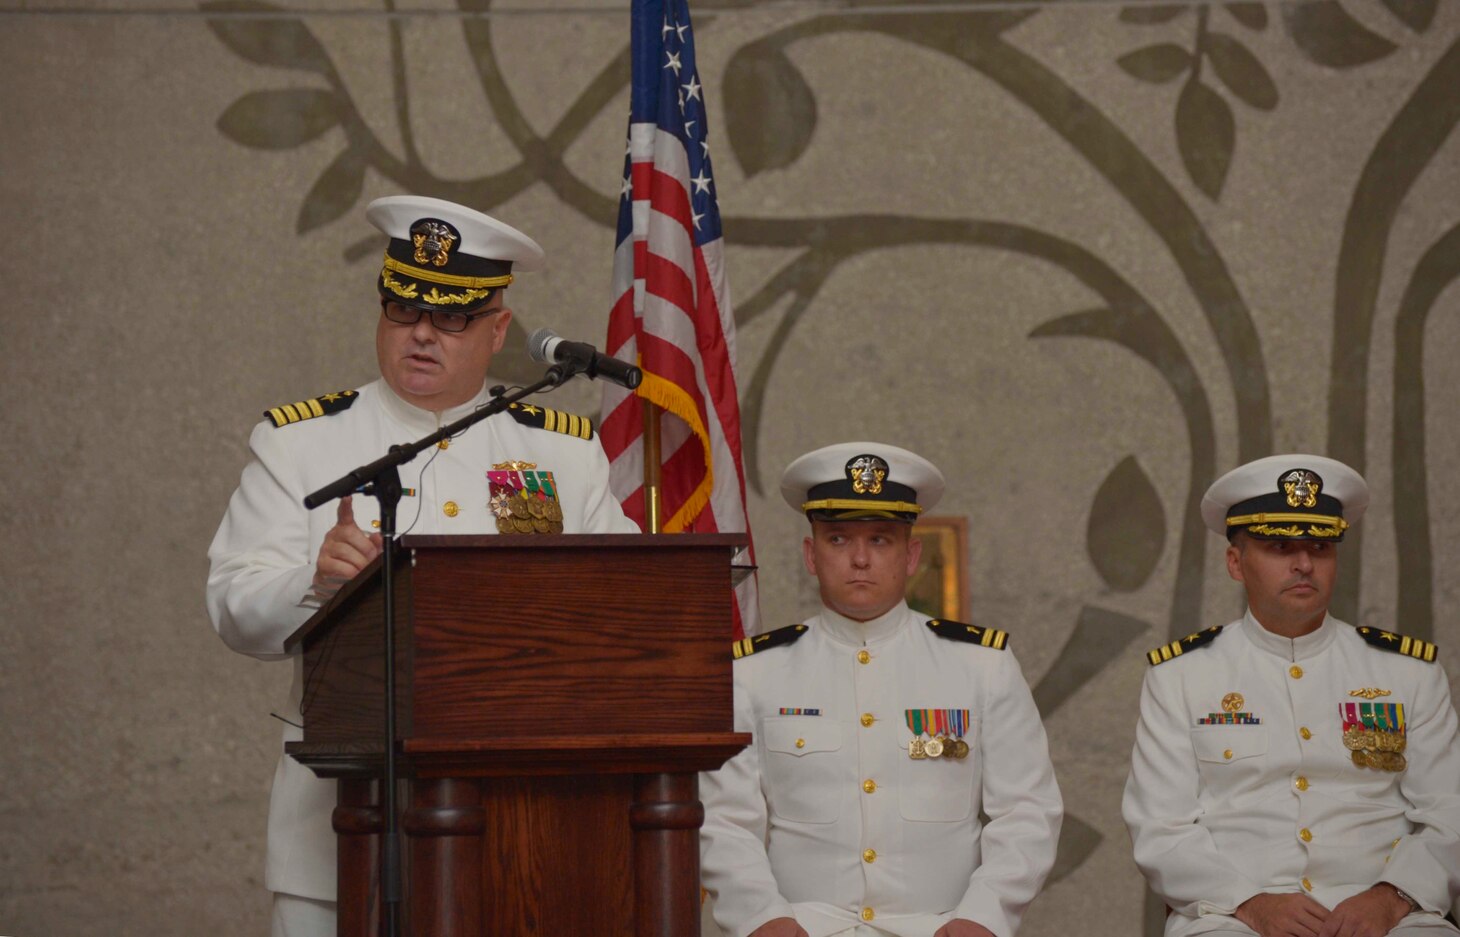 SANTA RITA, Guam (March 1, 2019) - Capt. Timothy Poe, Commander, Submarine Squadron Fifteen, addresses attendees during a change of command ceremony for the Los Angeles-class fast attack submarine USS Topeka (SSN 754), March 1. Topeka is one of four Guam-homeported submarines assigned COMSUBRON 15.